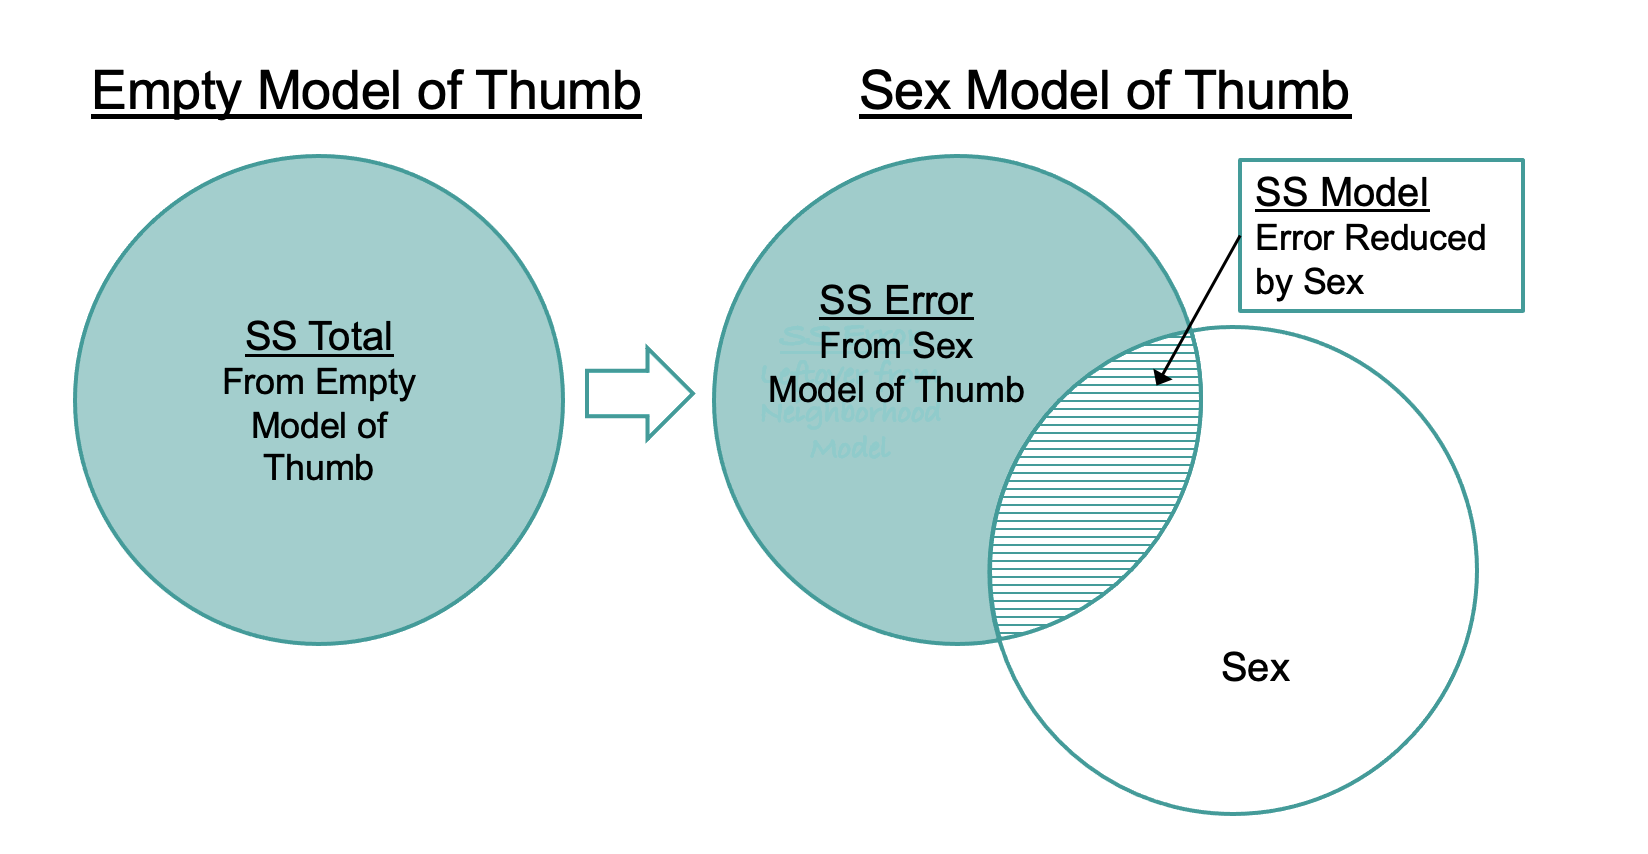 On the left, a single circle represents SS Total from the Empty Model of Thumb. An arrow from that circle points to a Venn diagram of two partially overlapping circles to the right. One circle is labeled as SS Error from the Sex Model of Thumb, and the other circle is labeled as Sex. The intersection where the two circles overlap is labeled as Error Reduced by Sex.